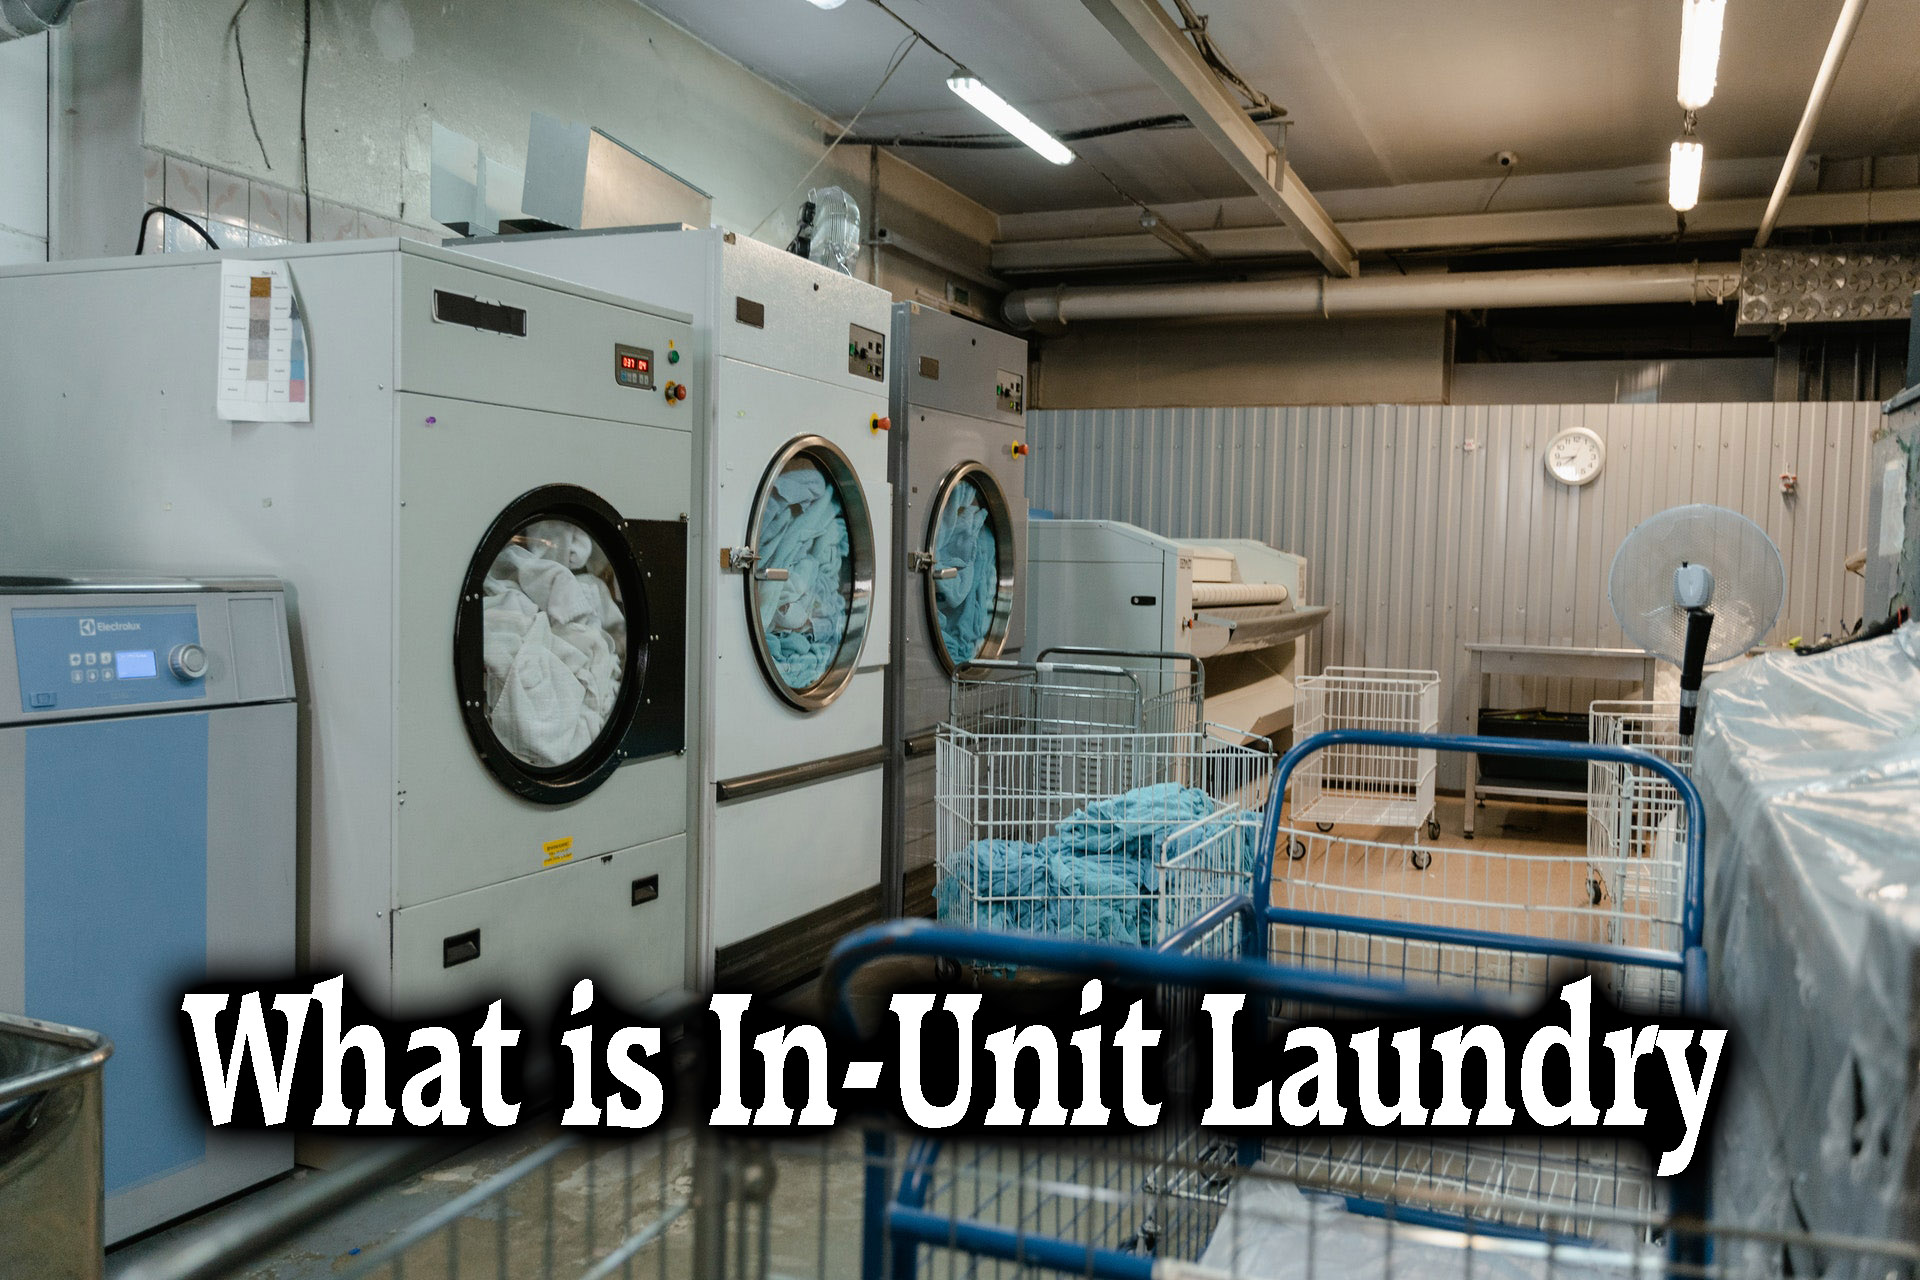 The Art Of Laundry: How To Achieve Impeccably Clean And Organized Clothing